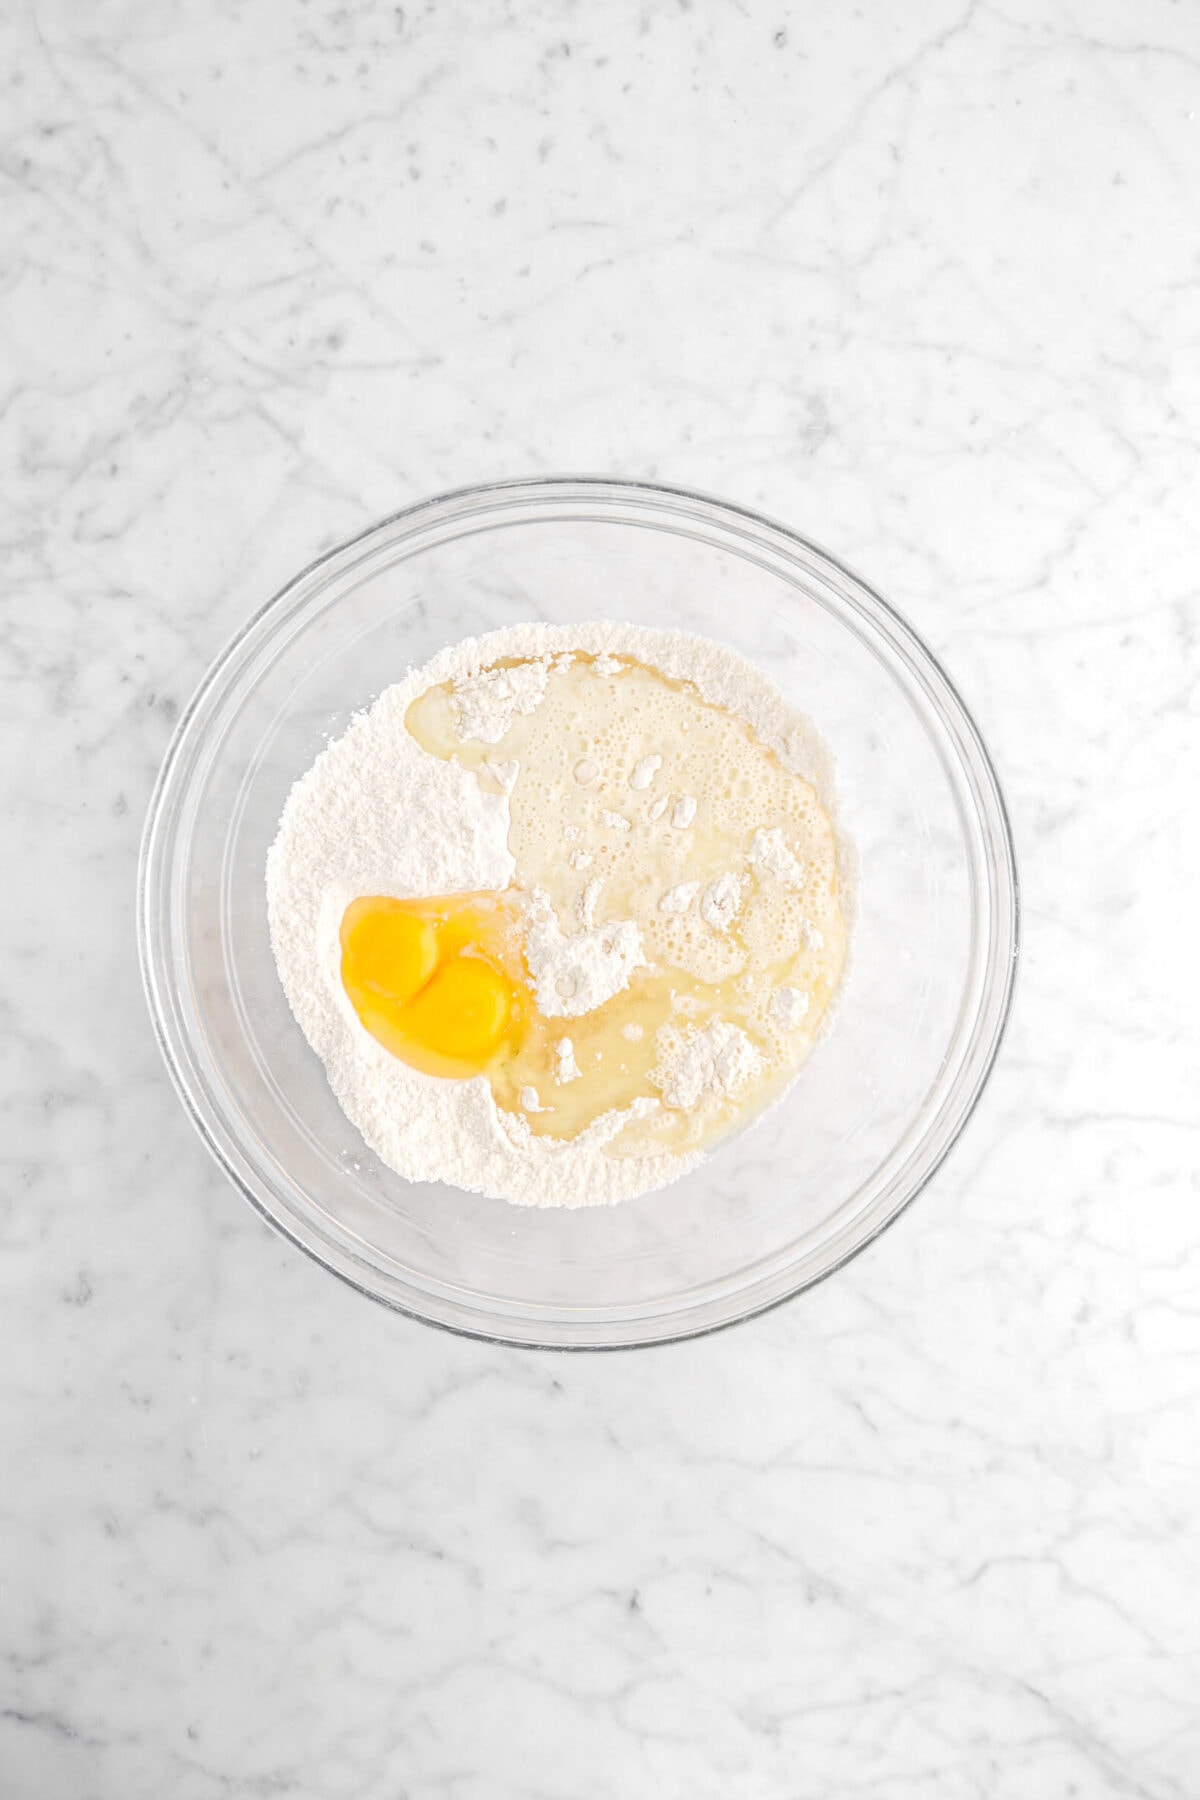 eggs, milk, oil, and vanilla added to dry ingredients